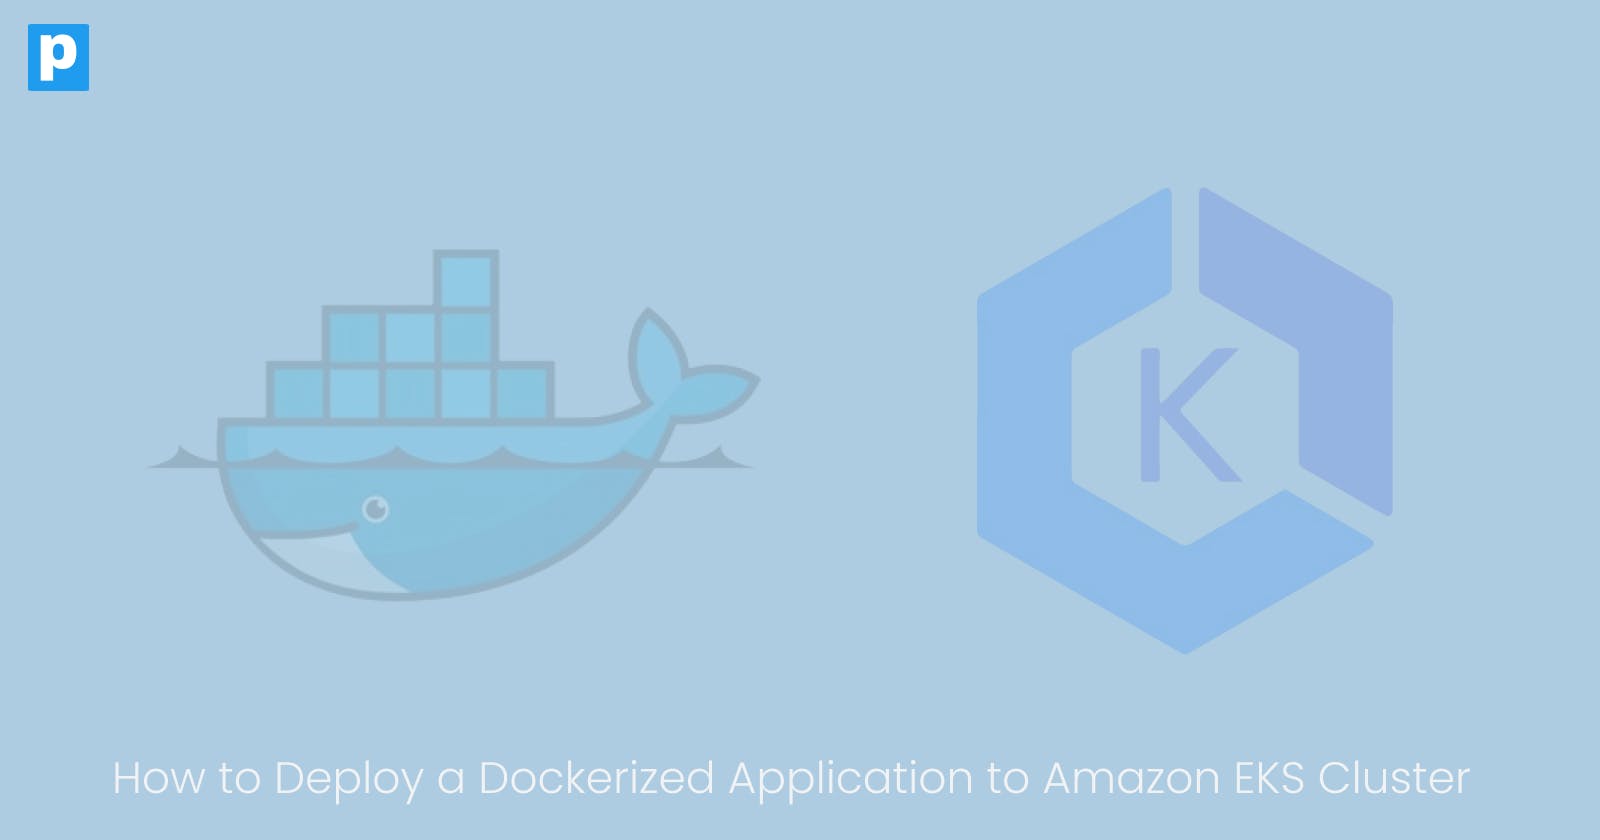 How to Deploy a Dockerized Application to Amazon EKS Cluster